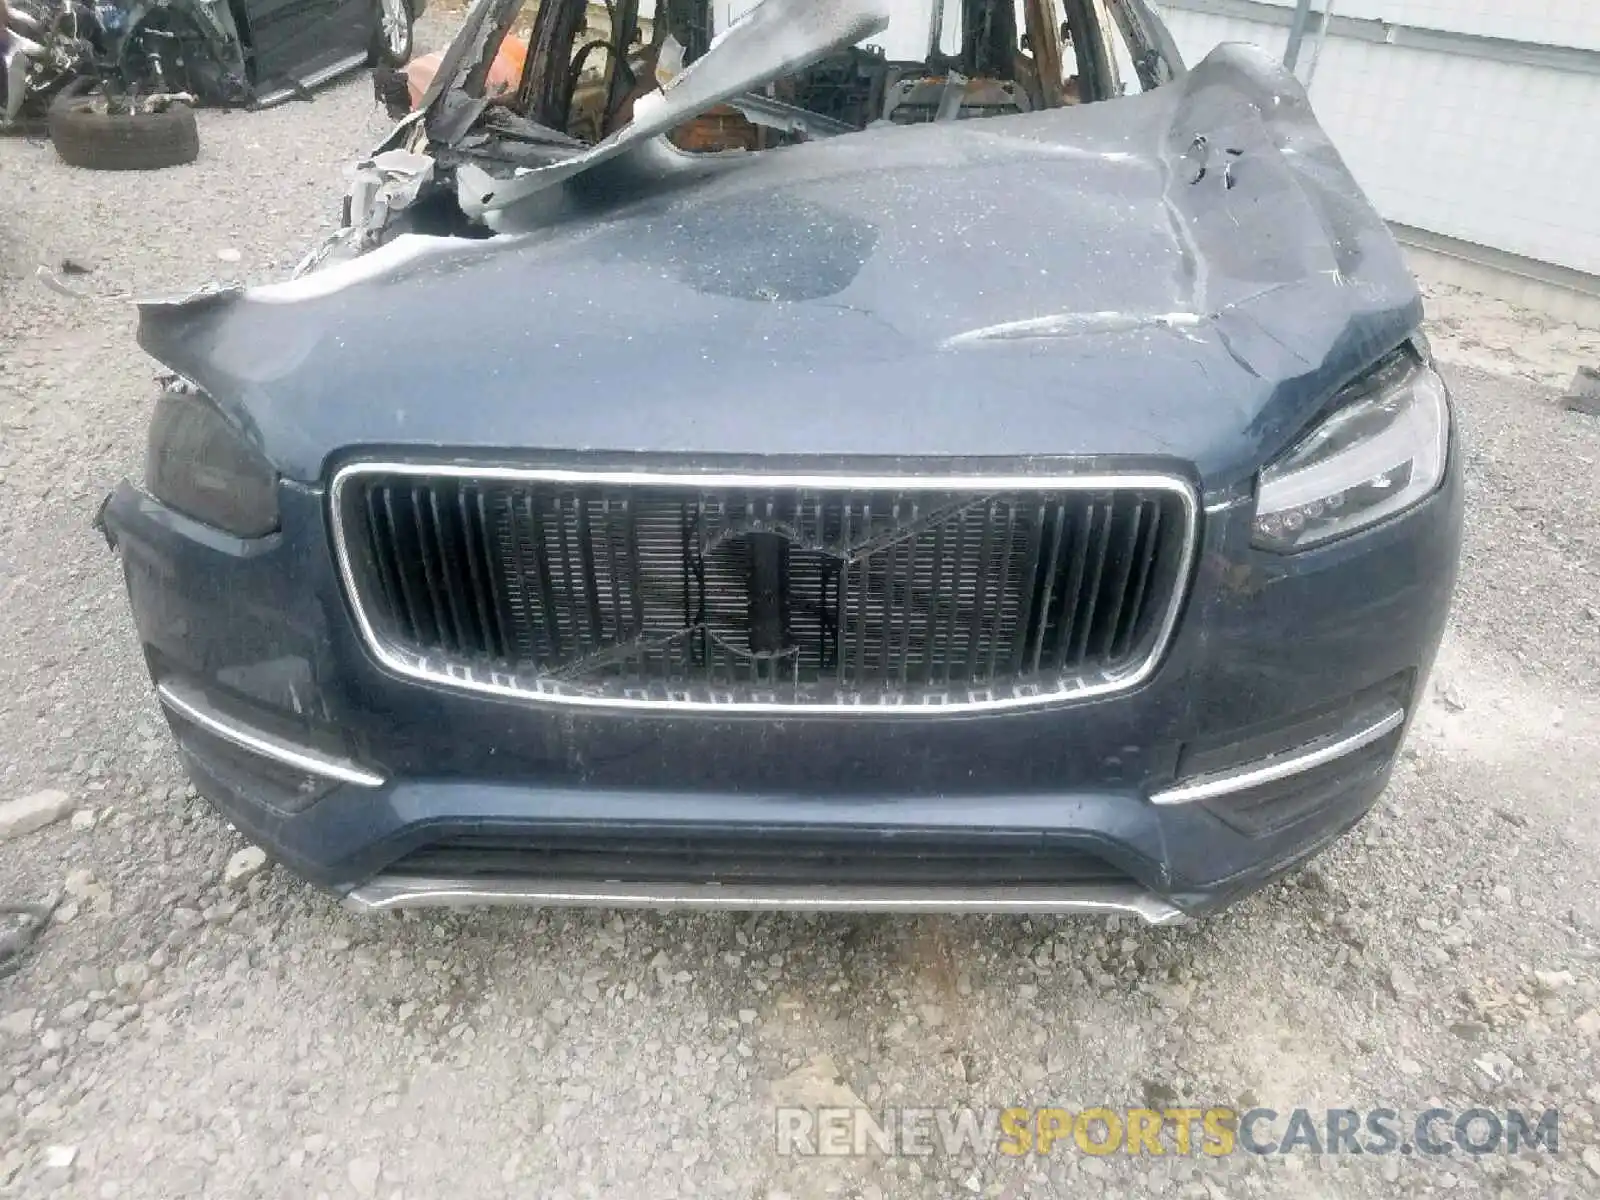 7 Photograph of a damaged car YV4102CK1K1461084 VOLVO XC90 T5 2019